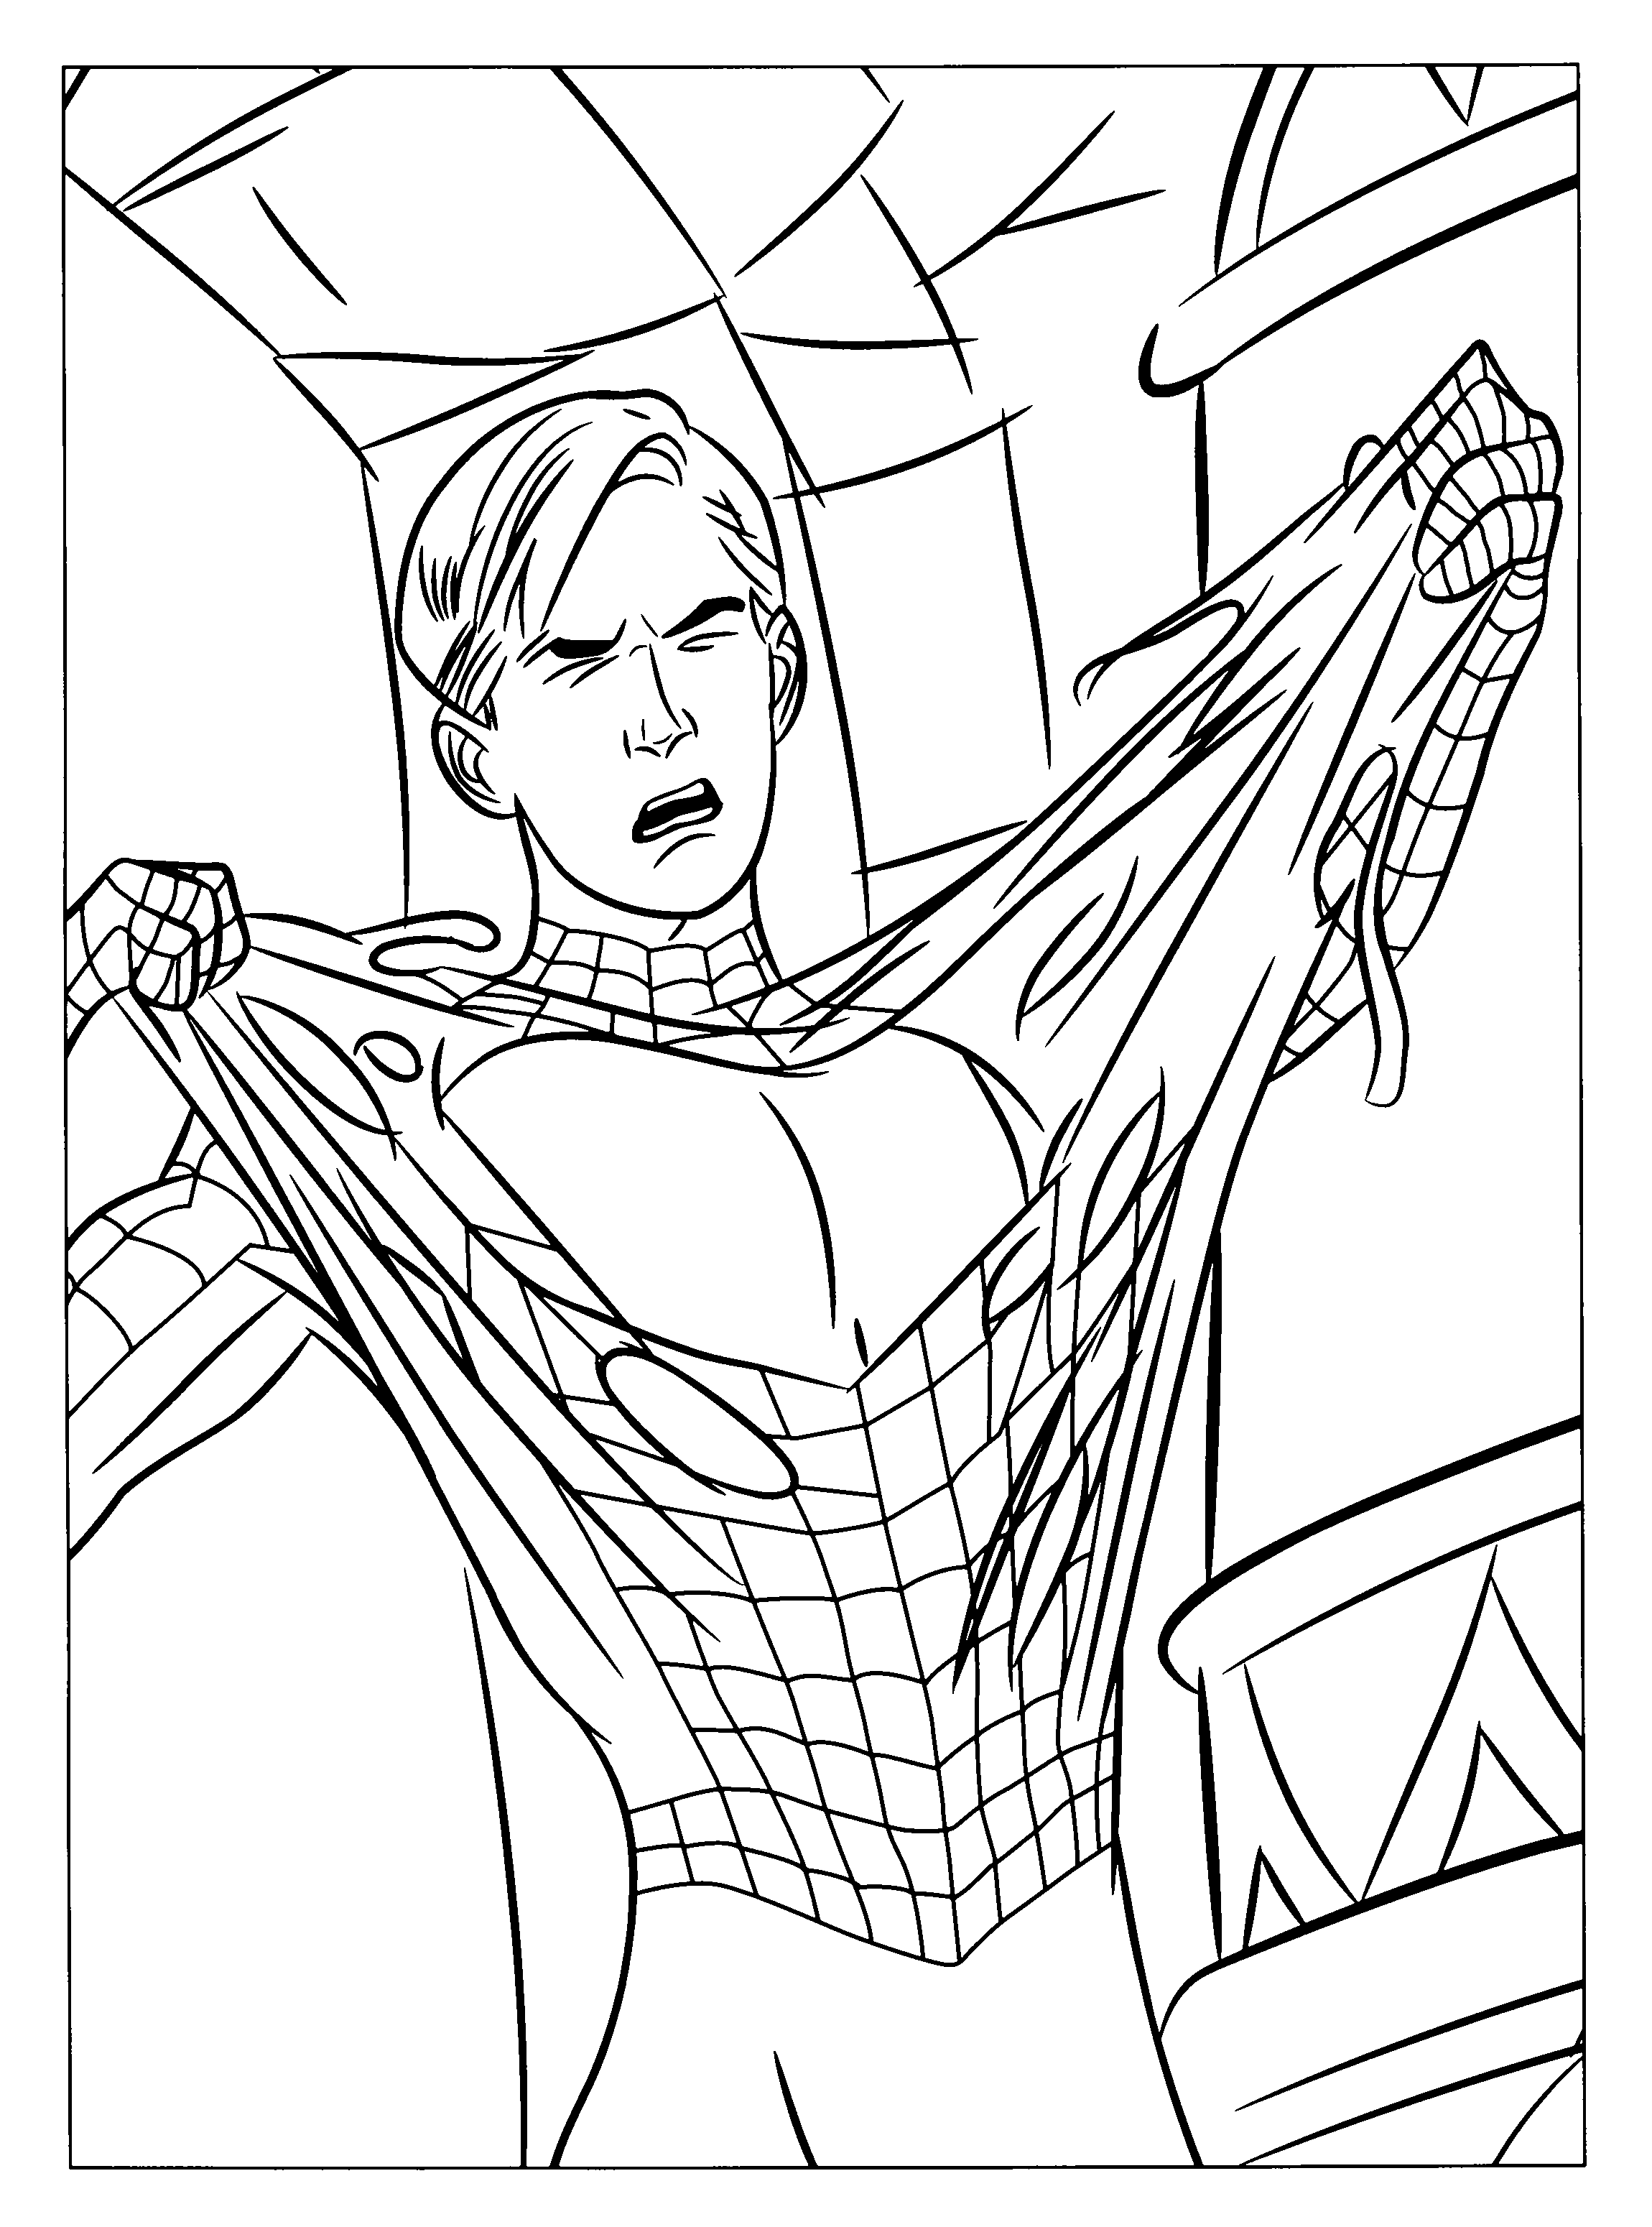 spiderman 3 coloring pages